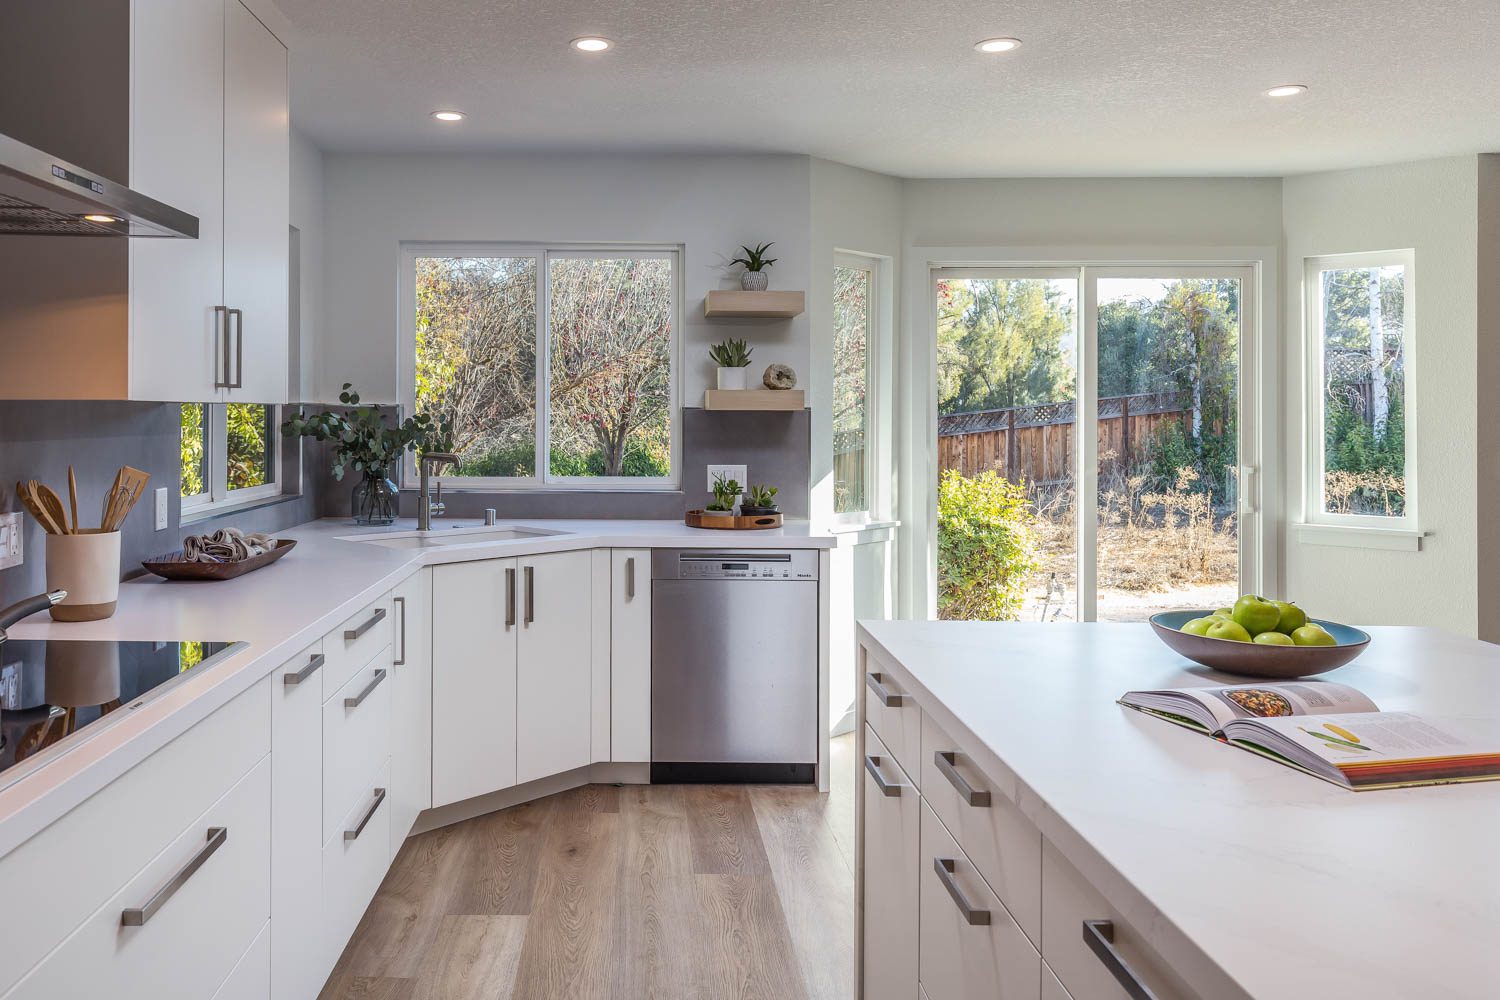 Eco-friendly-appliances-are-a-must-for-a-solid-kitchen-remodel-return-on-investment